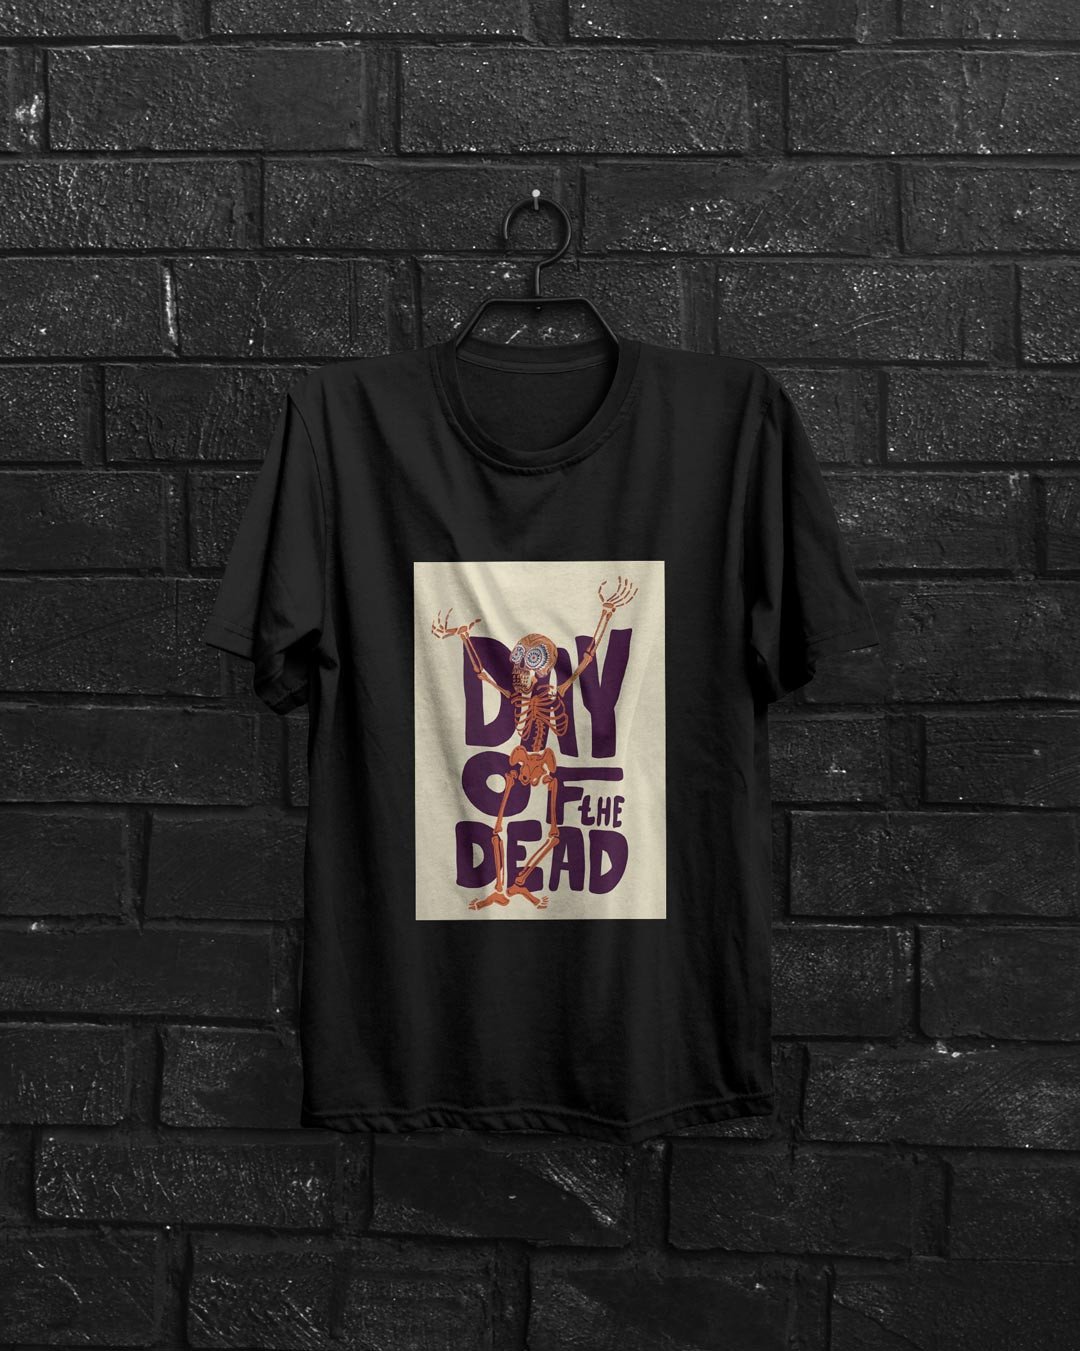 Day of The Dead Printed Cotton T-Shirts